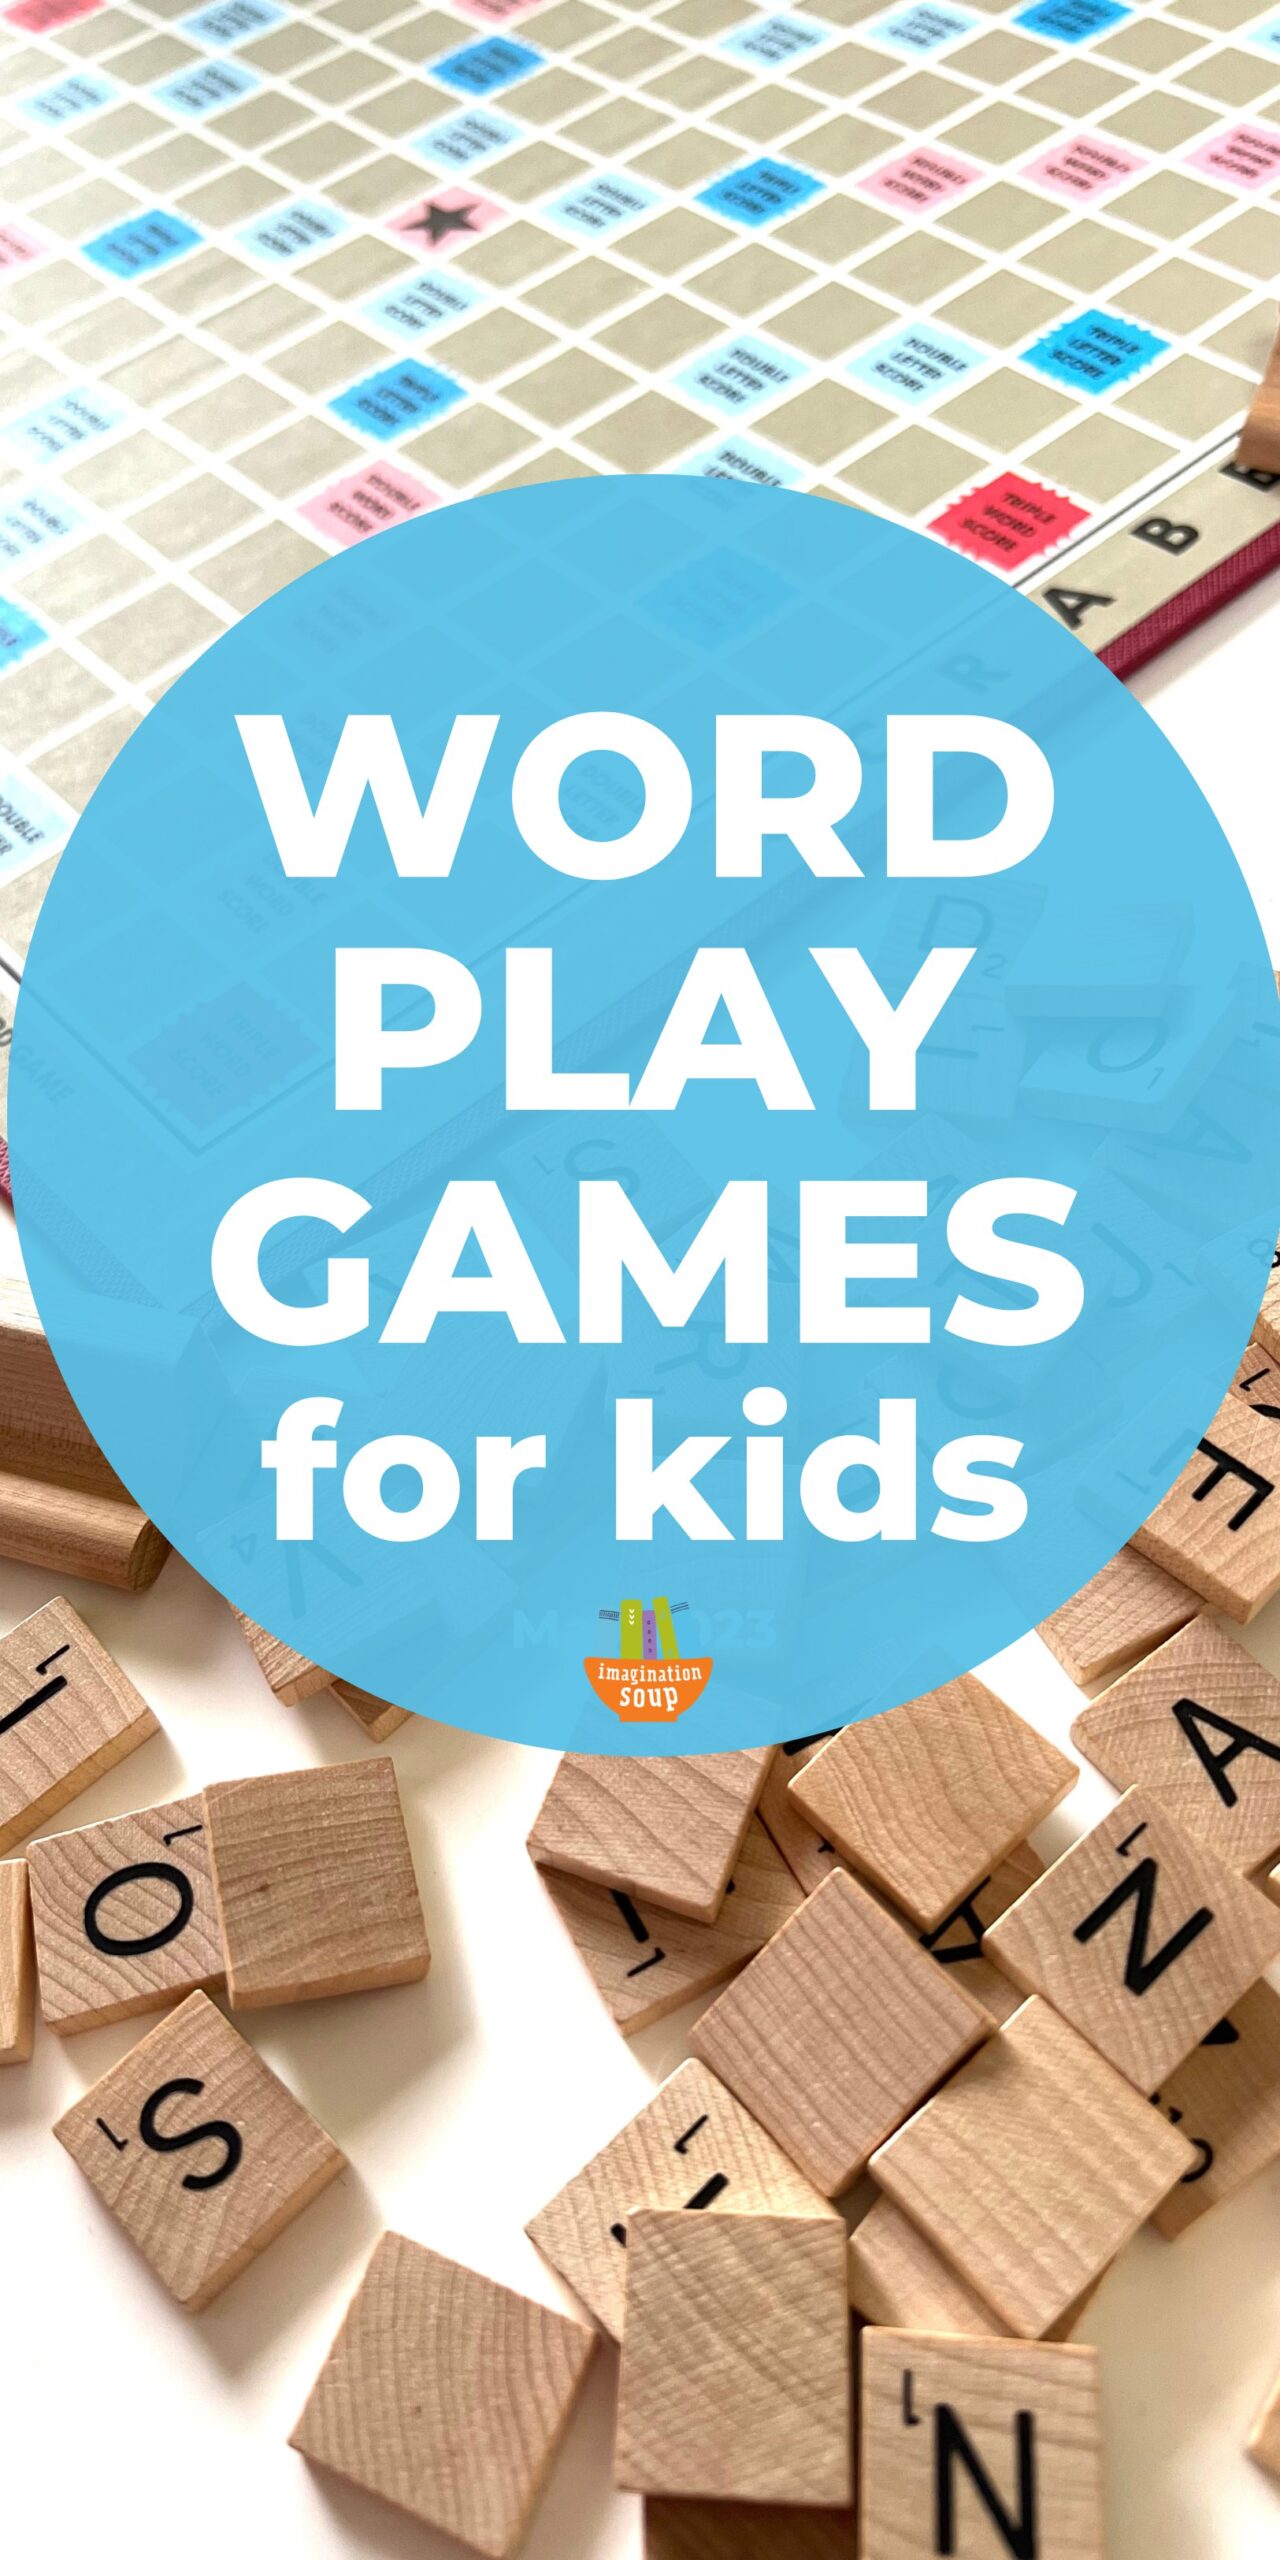 Get kids excited about words with word play games, books, and activities guaranteed to entertain and delight! Once kids see the fun in words, there's no telling how much that will positively affect them as readers and writers...